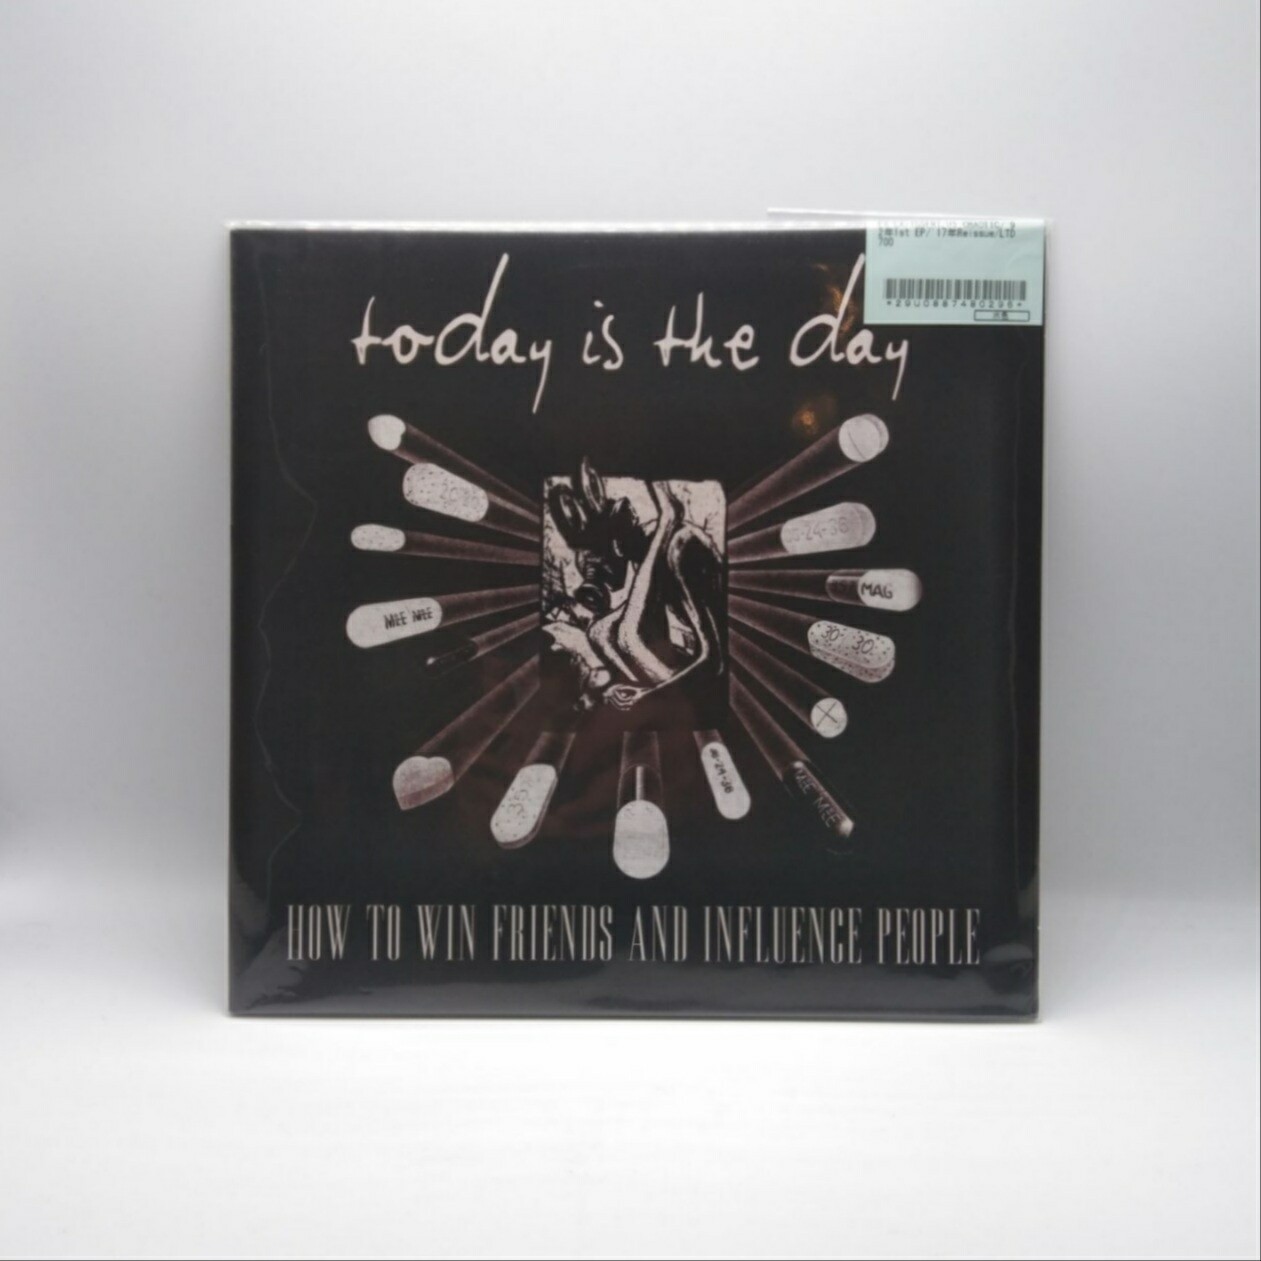 [USED] TODAY IS THE DAY -HOW TO WIN FRIENDS AND INFLUENCE PEOPLE- 10 INCH EP